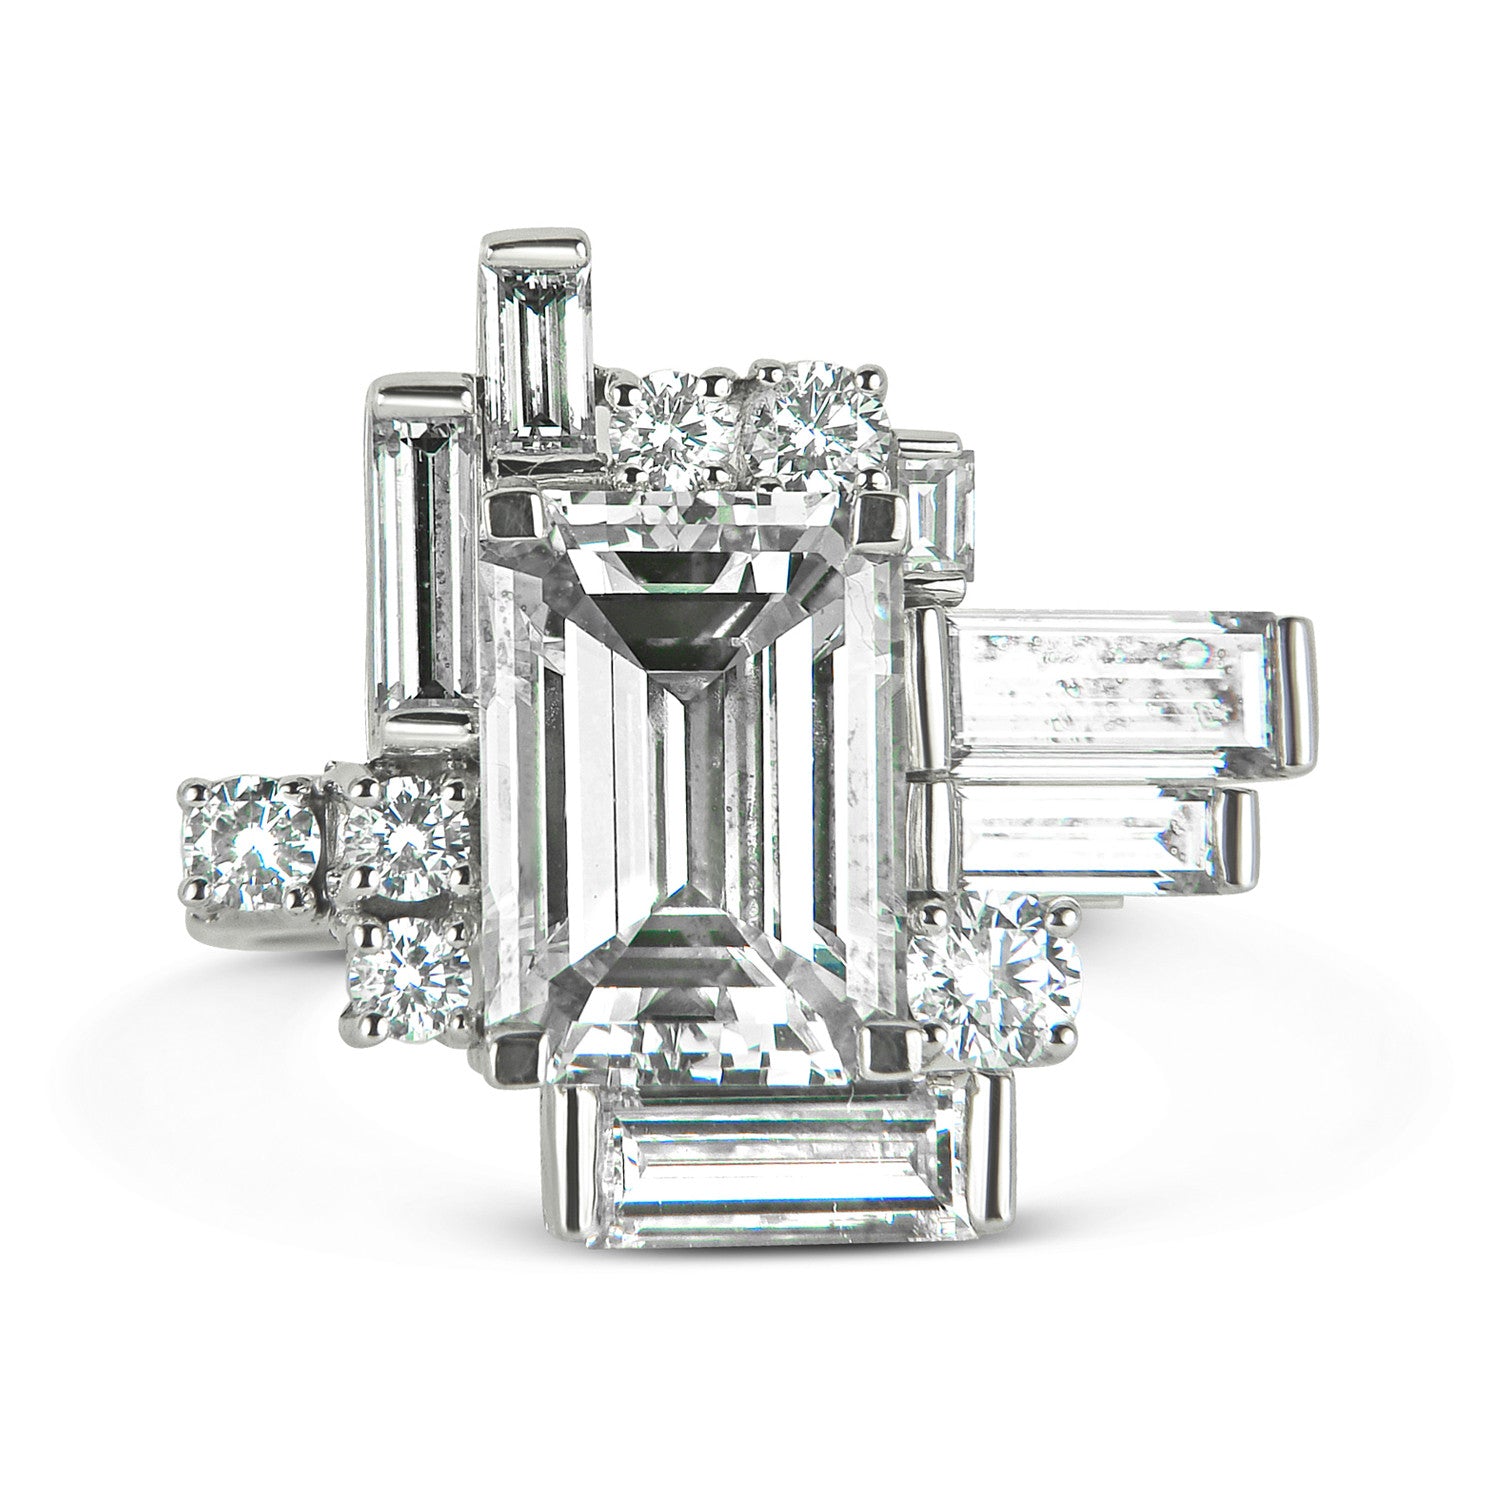 Bespoke Corene Art Deco cocktail ring - 18ct recycled white gold and recycled baguette diamonds